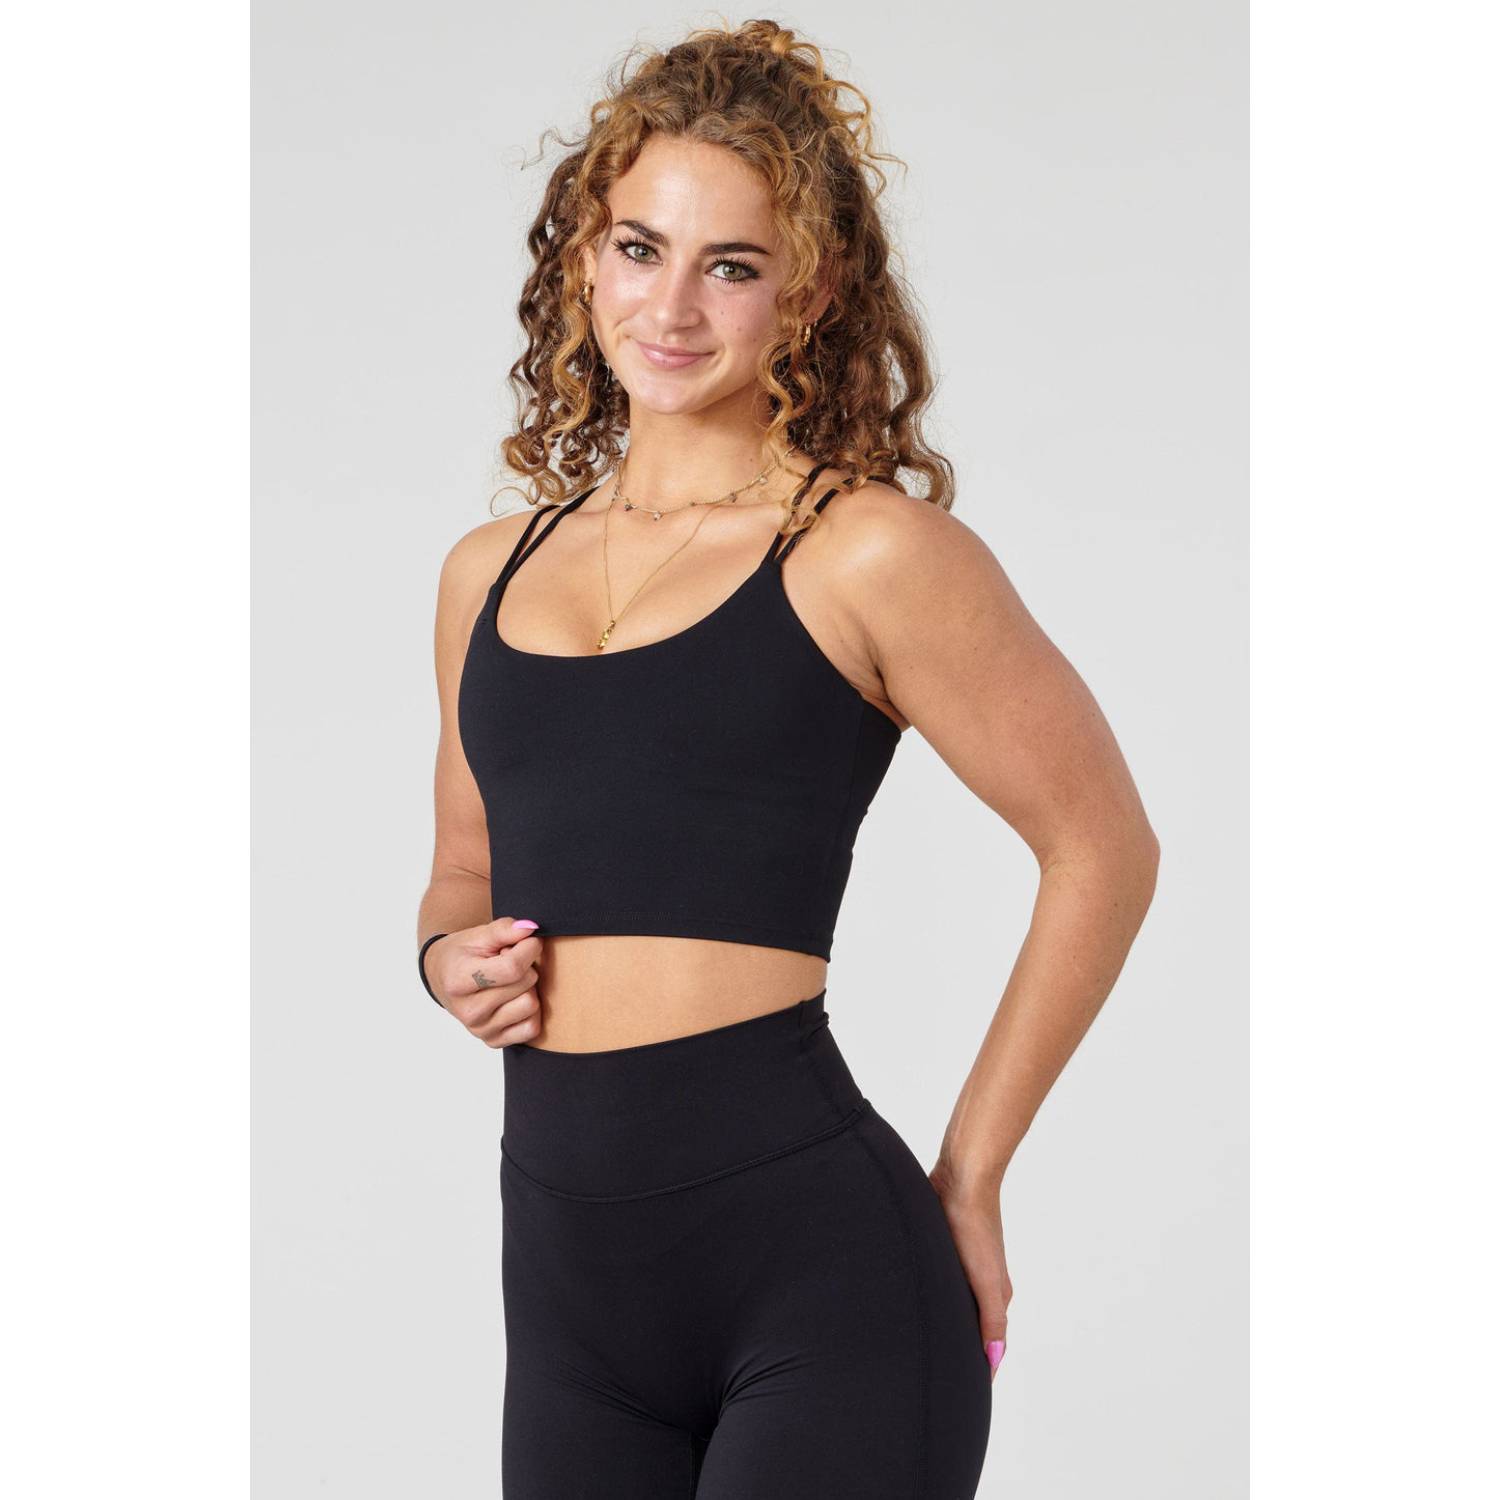 Ropa gym mujer